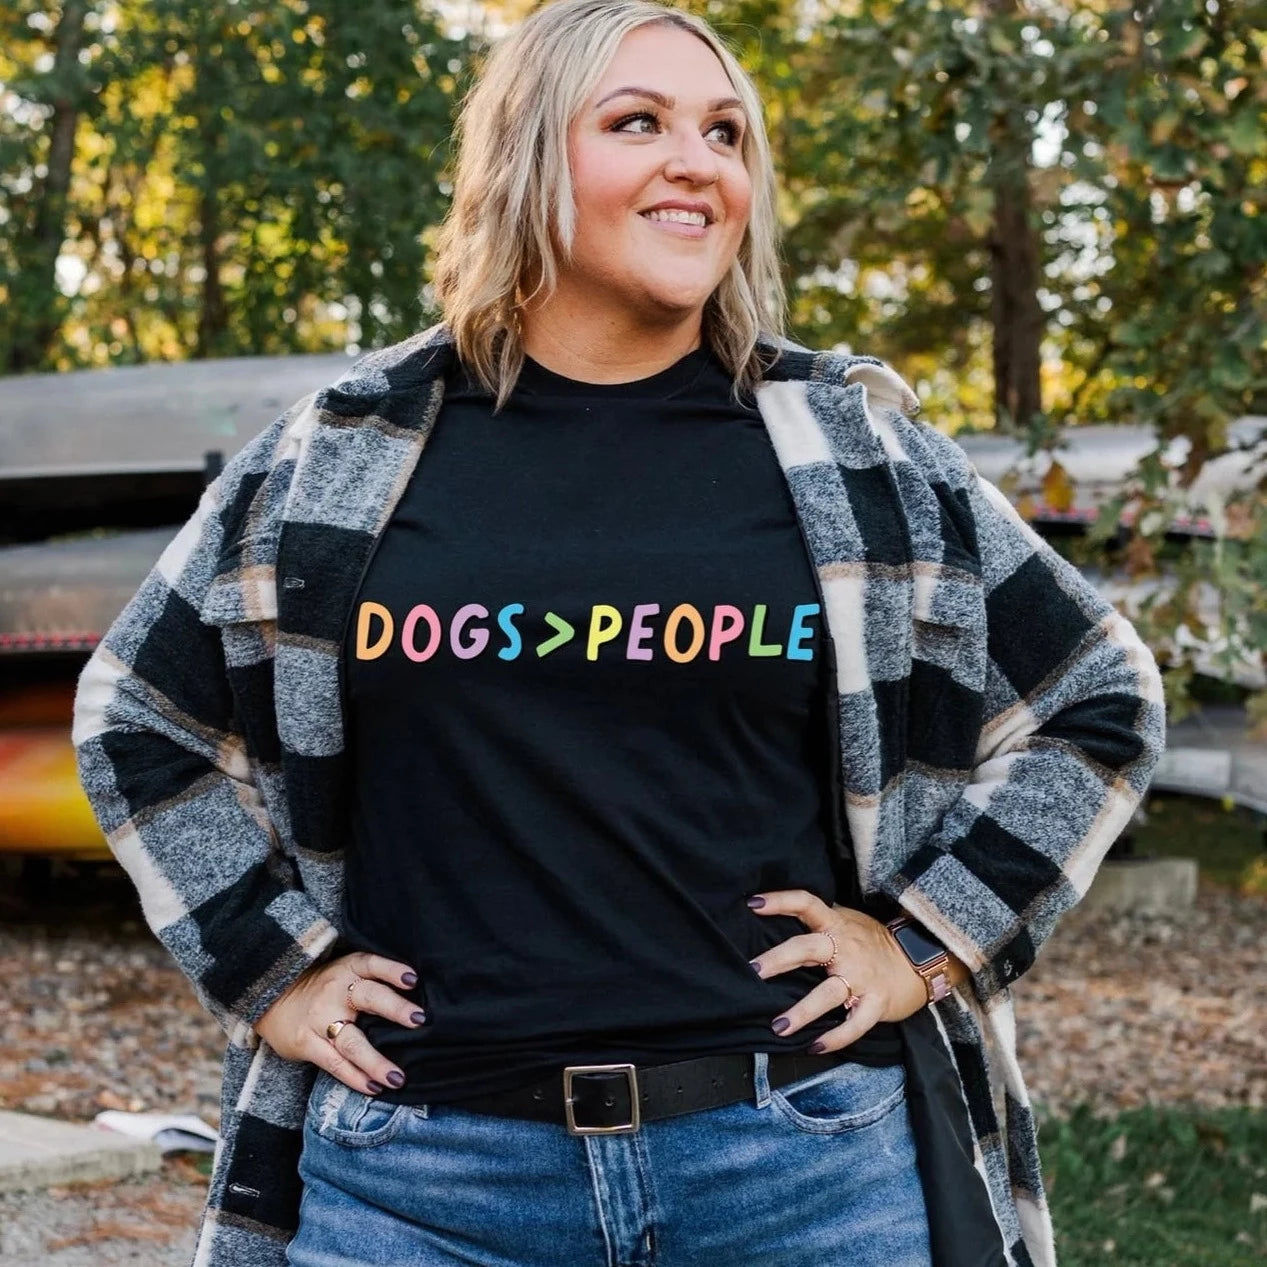 "Dogs > People" T-shirt (shown on "Black")